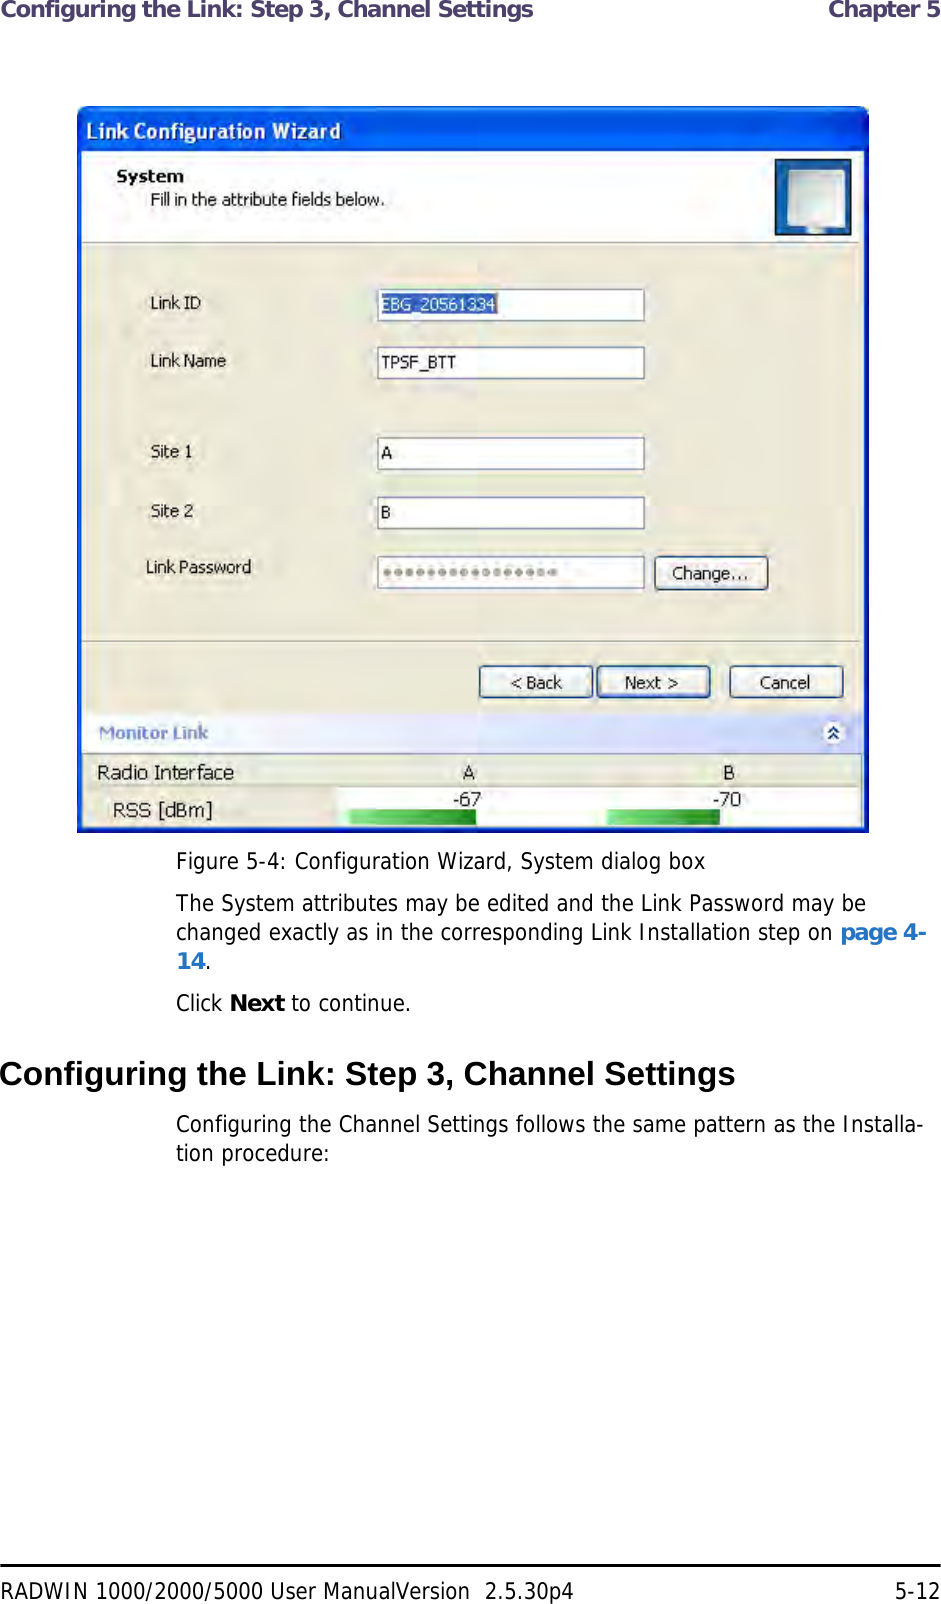 Configuring the Link: Step 3, Channel Settings  Chapter 5RADWIN 1000/2000/5000 User ManualVersion  2.5.30p4 5-12Figure 5-4: Configuration Wizard, System dialog boxThe System attributes may be edited and the Link Password may be changed exactly as in the corresponding Link Installation step on page 4-14.Click Next to continue.Configuring the Link: Step 3, Channel SettingsConfiguring the Channel Settings follows the same pattern as the Installa-tion procedure: